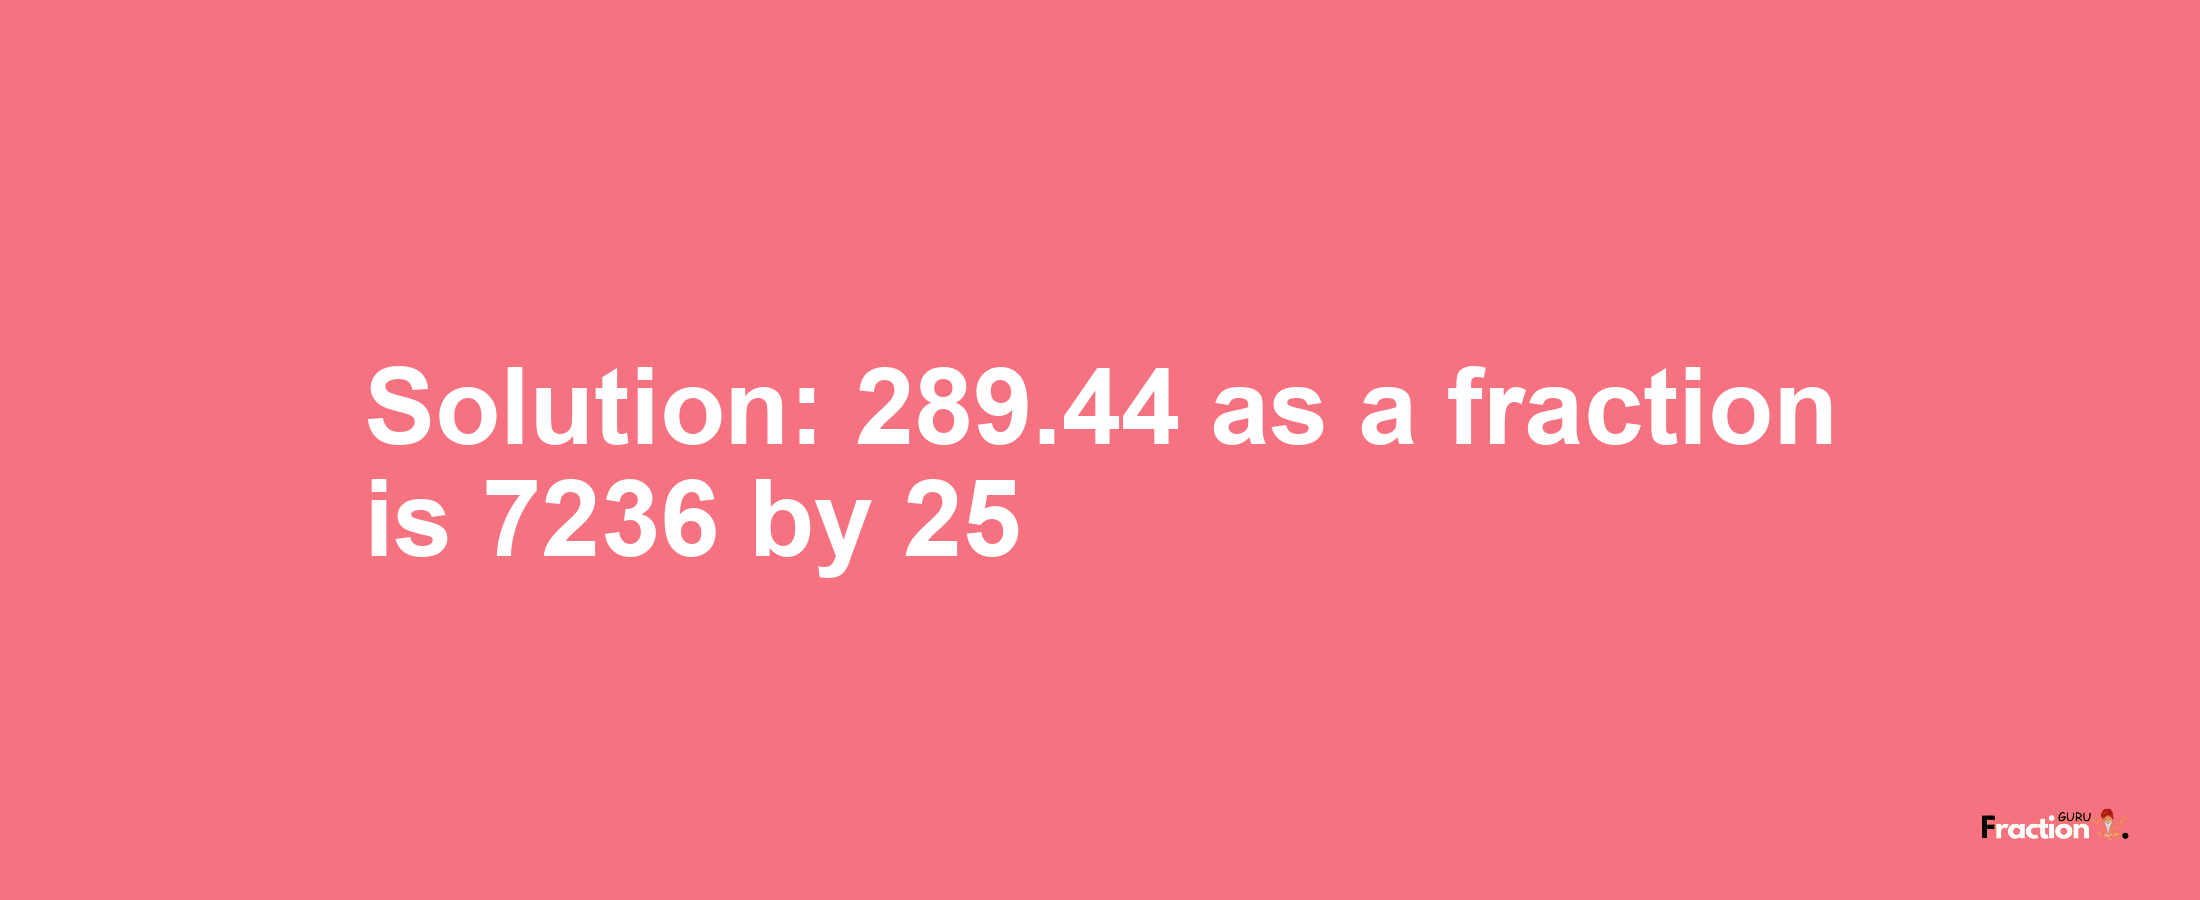 Solution:289.44 as a fraction is 7236/25